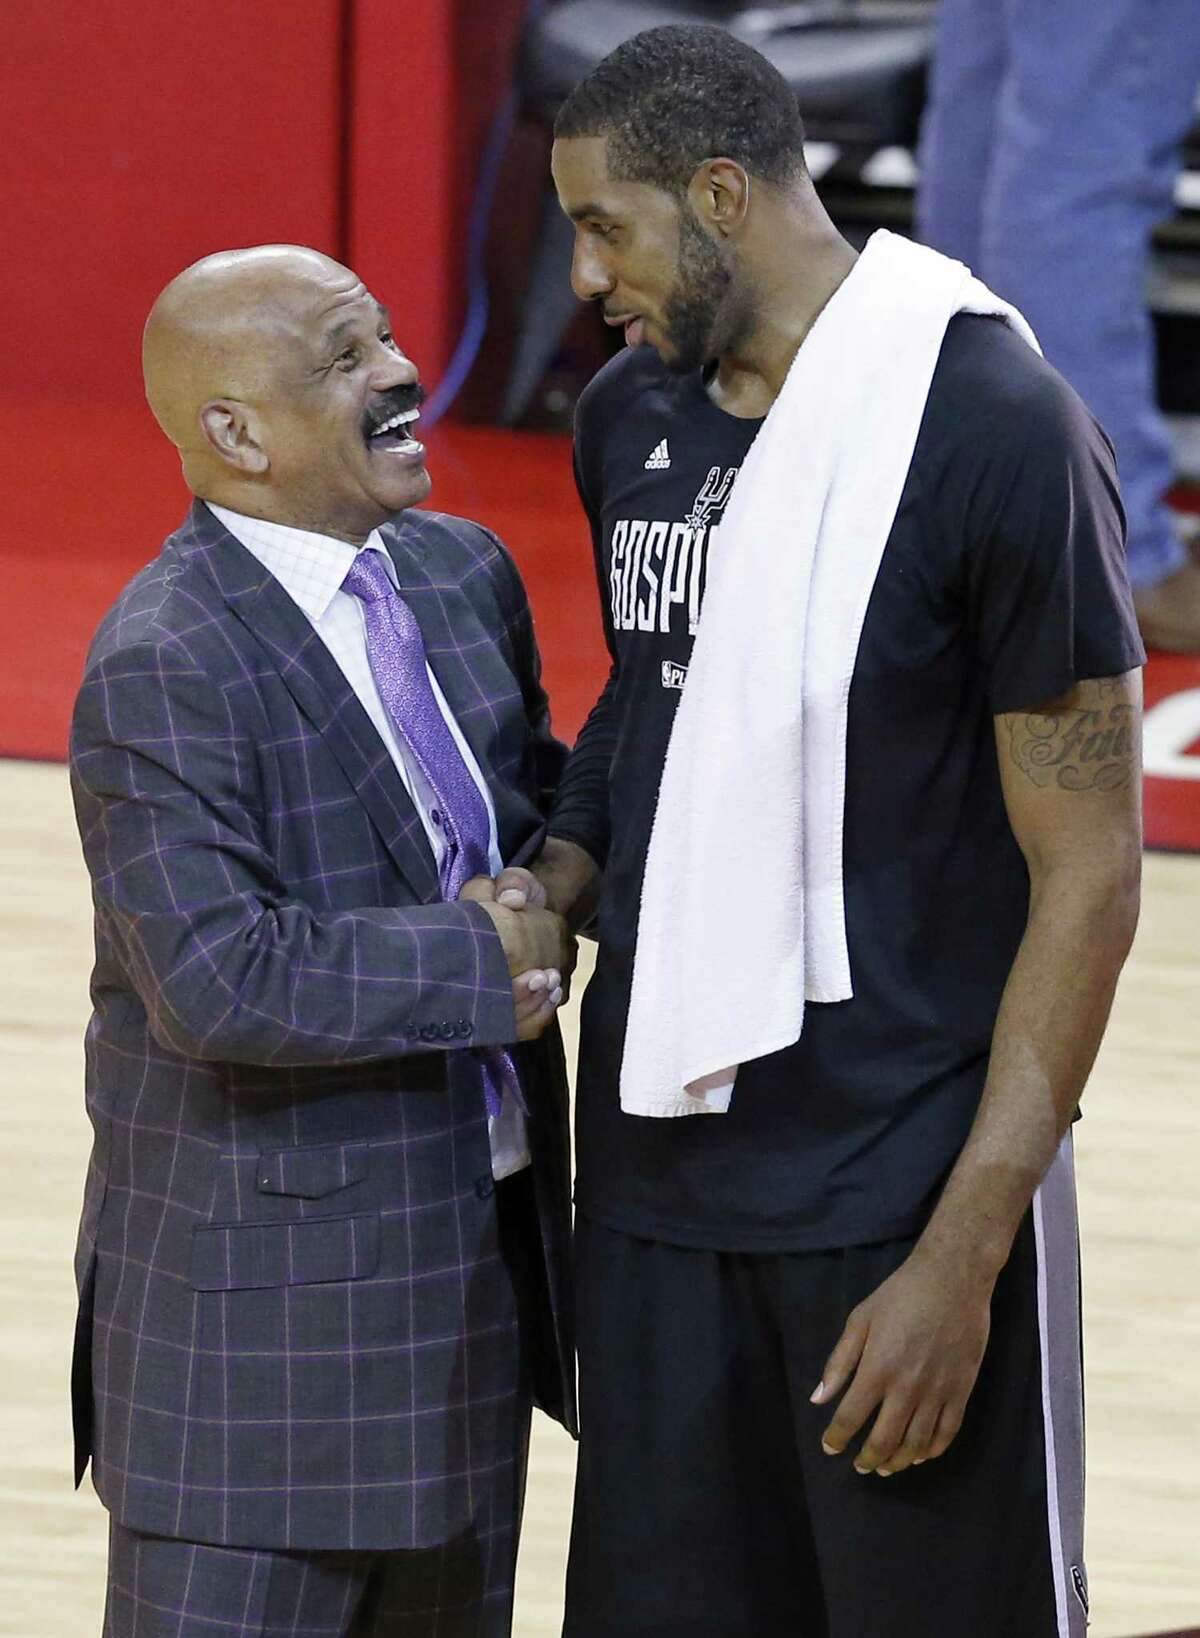 Former San Antonio Spurs player and coach John Lucas, who is the now the player development coach with the Houston Rockets, talks with San Antonio Spurs' LaMarcus Aldridge after Game 6 in the Western Conference semifinals held Thursday May 11, 2017 at the Toyota Center in Houston,Tx. The Spurs won 114-75.